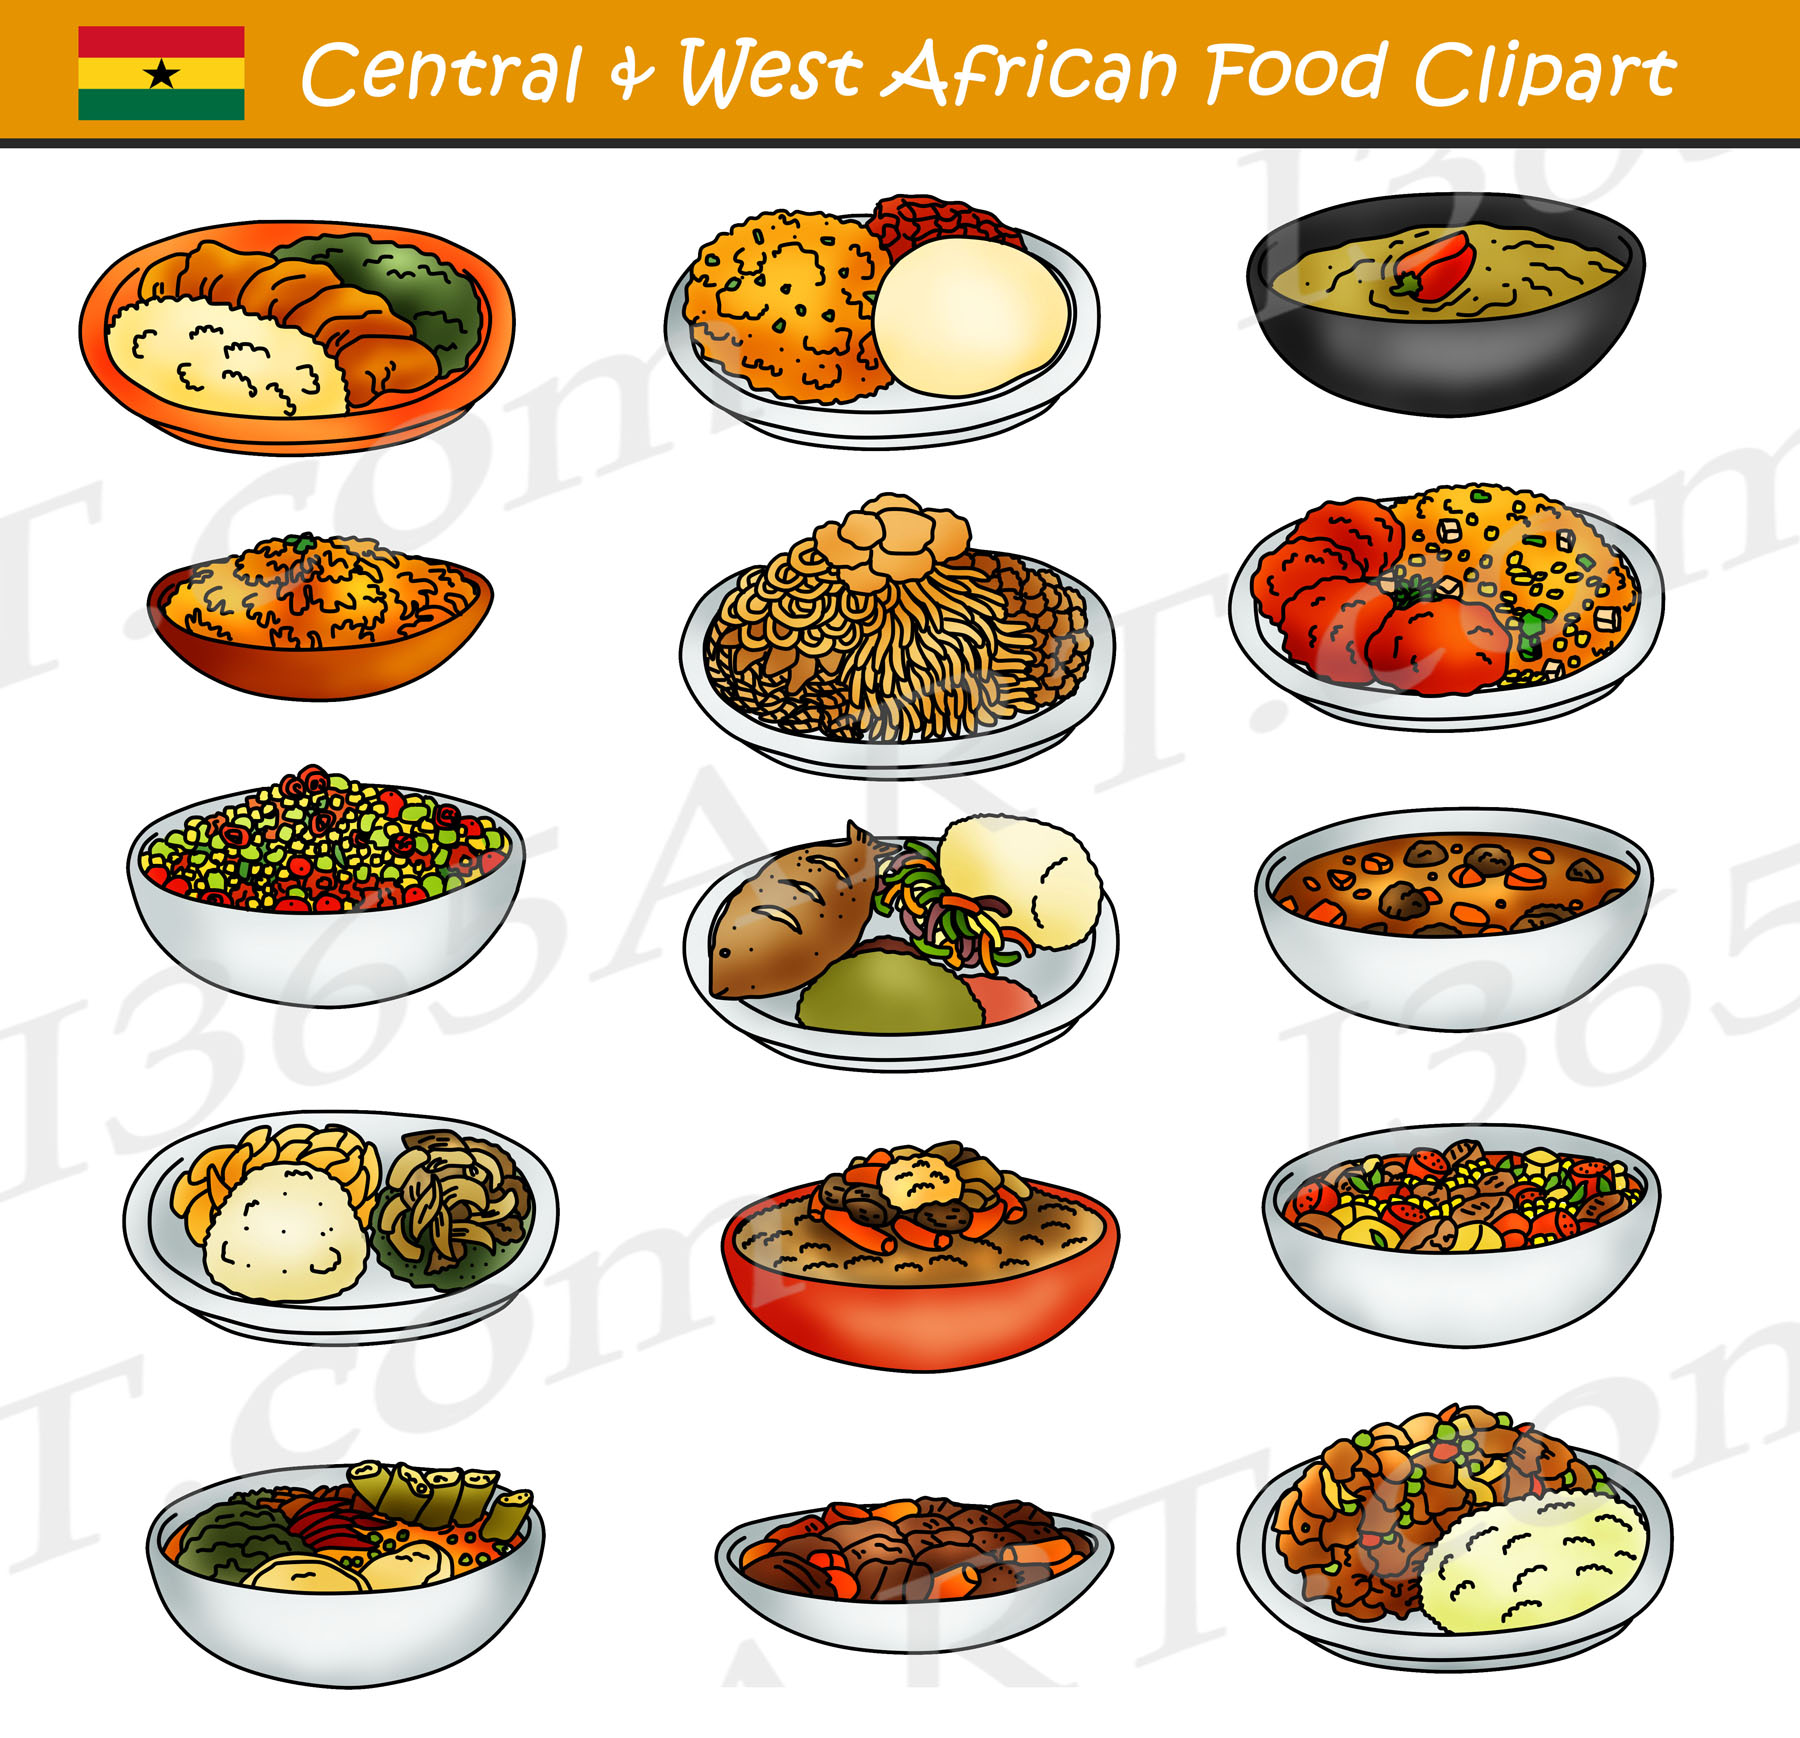 Central and Western African Food Clipart Download.